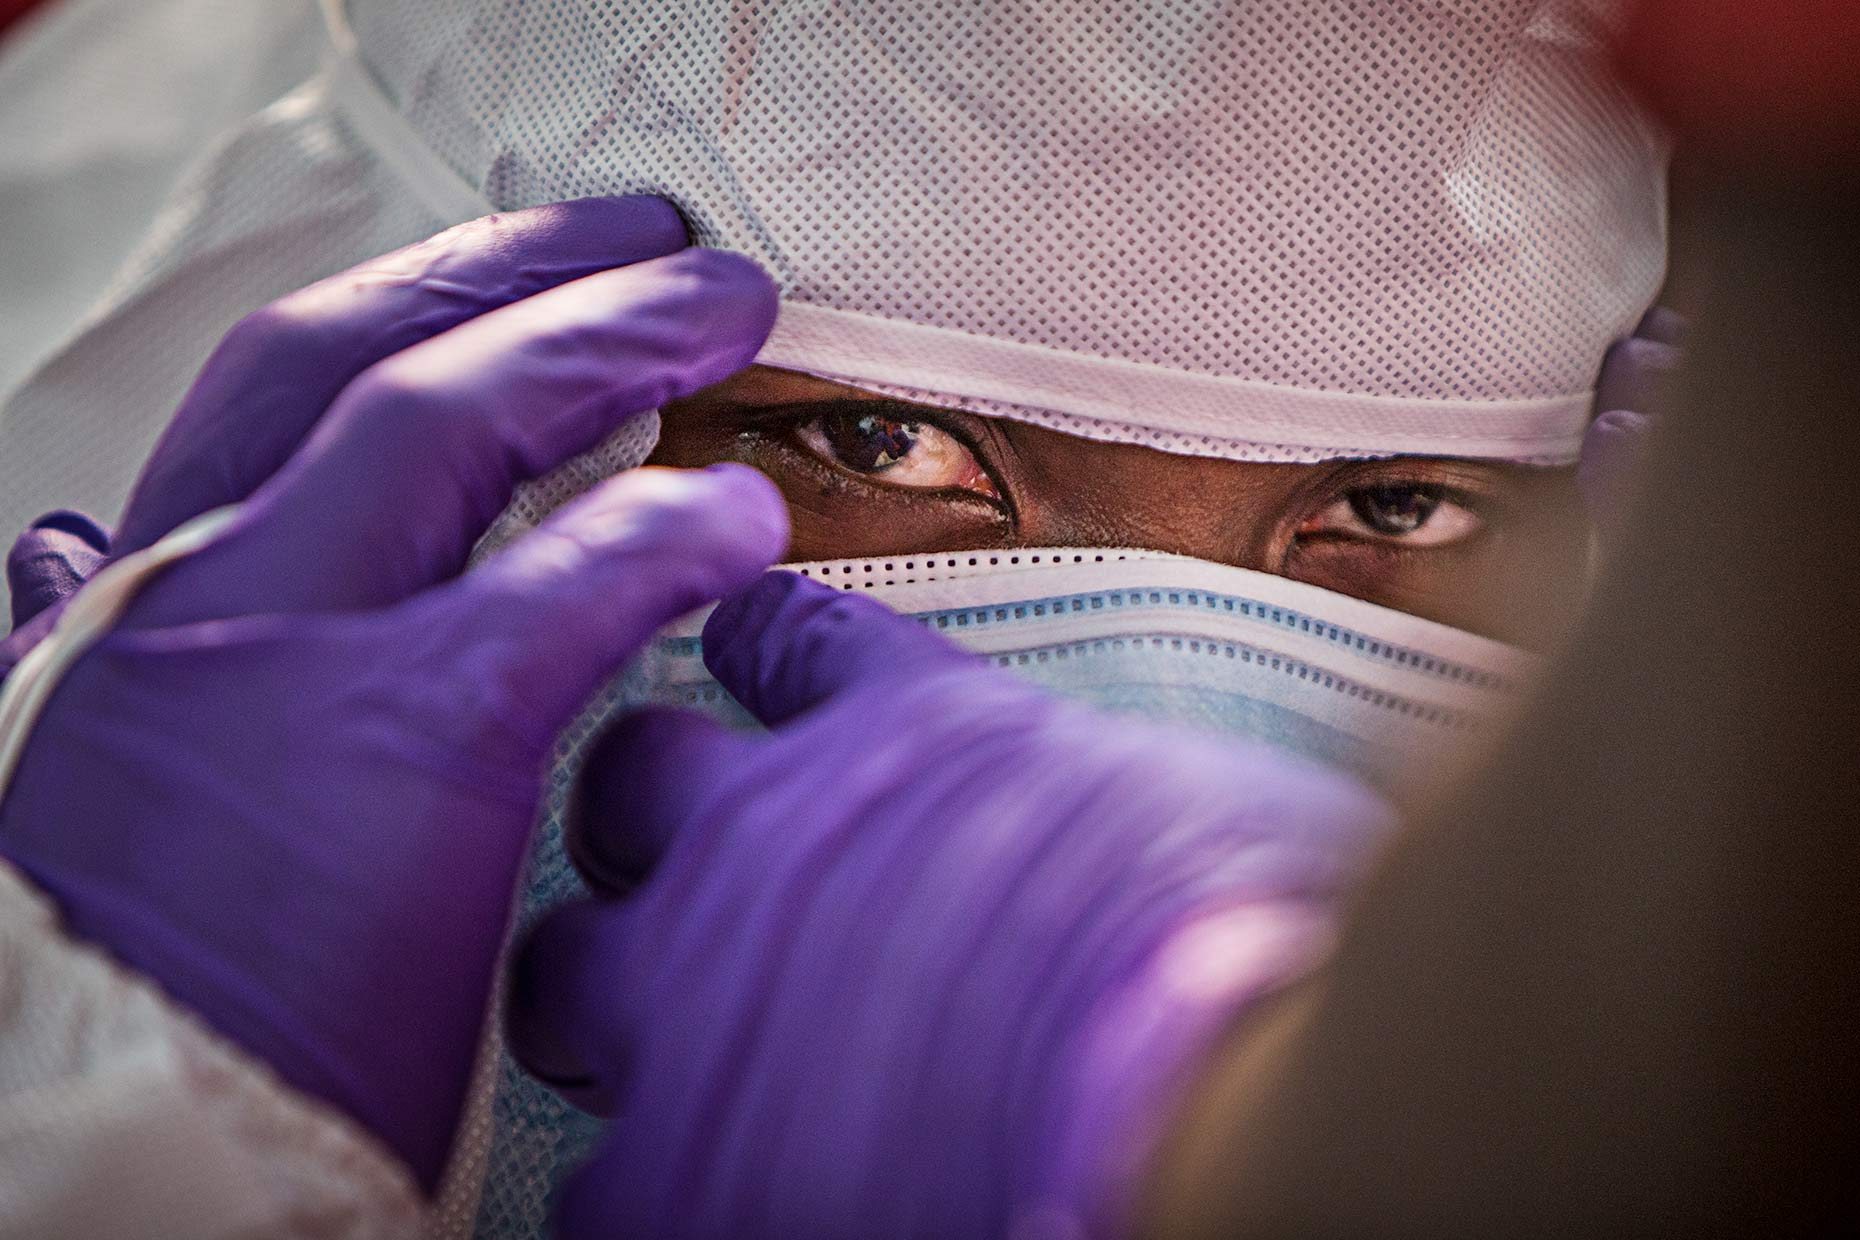 A doctor in An Ebola hospital dons protective gear before entering the ward